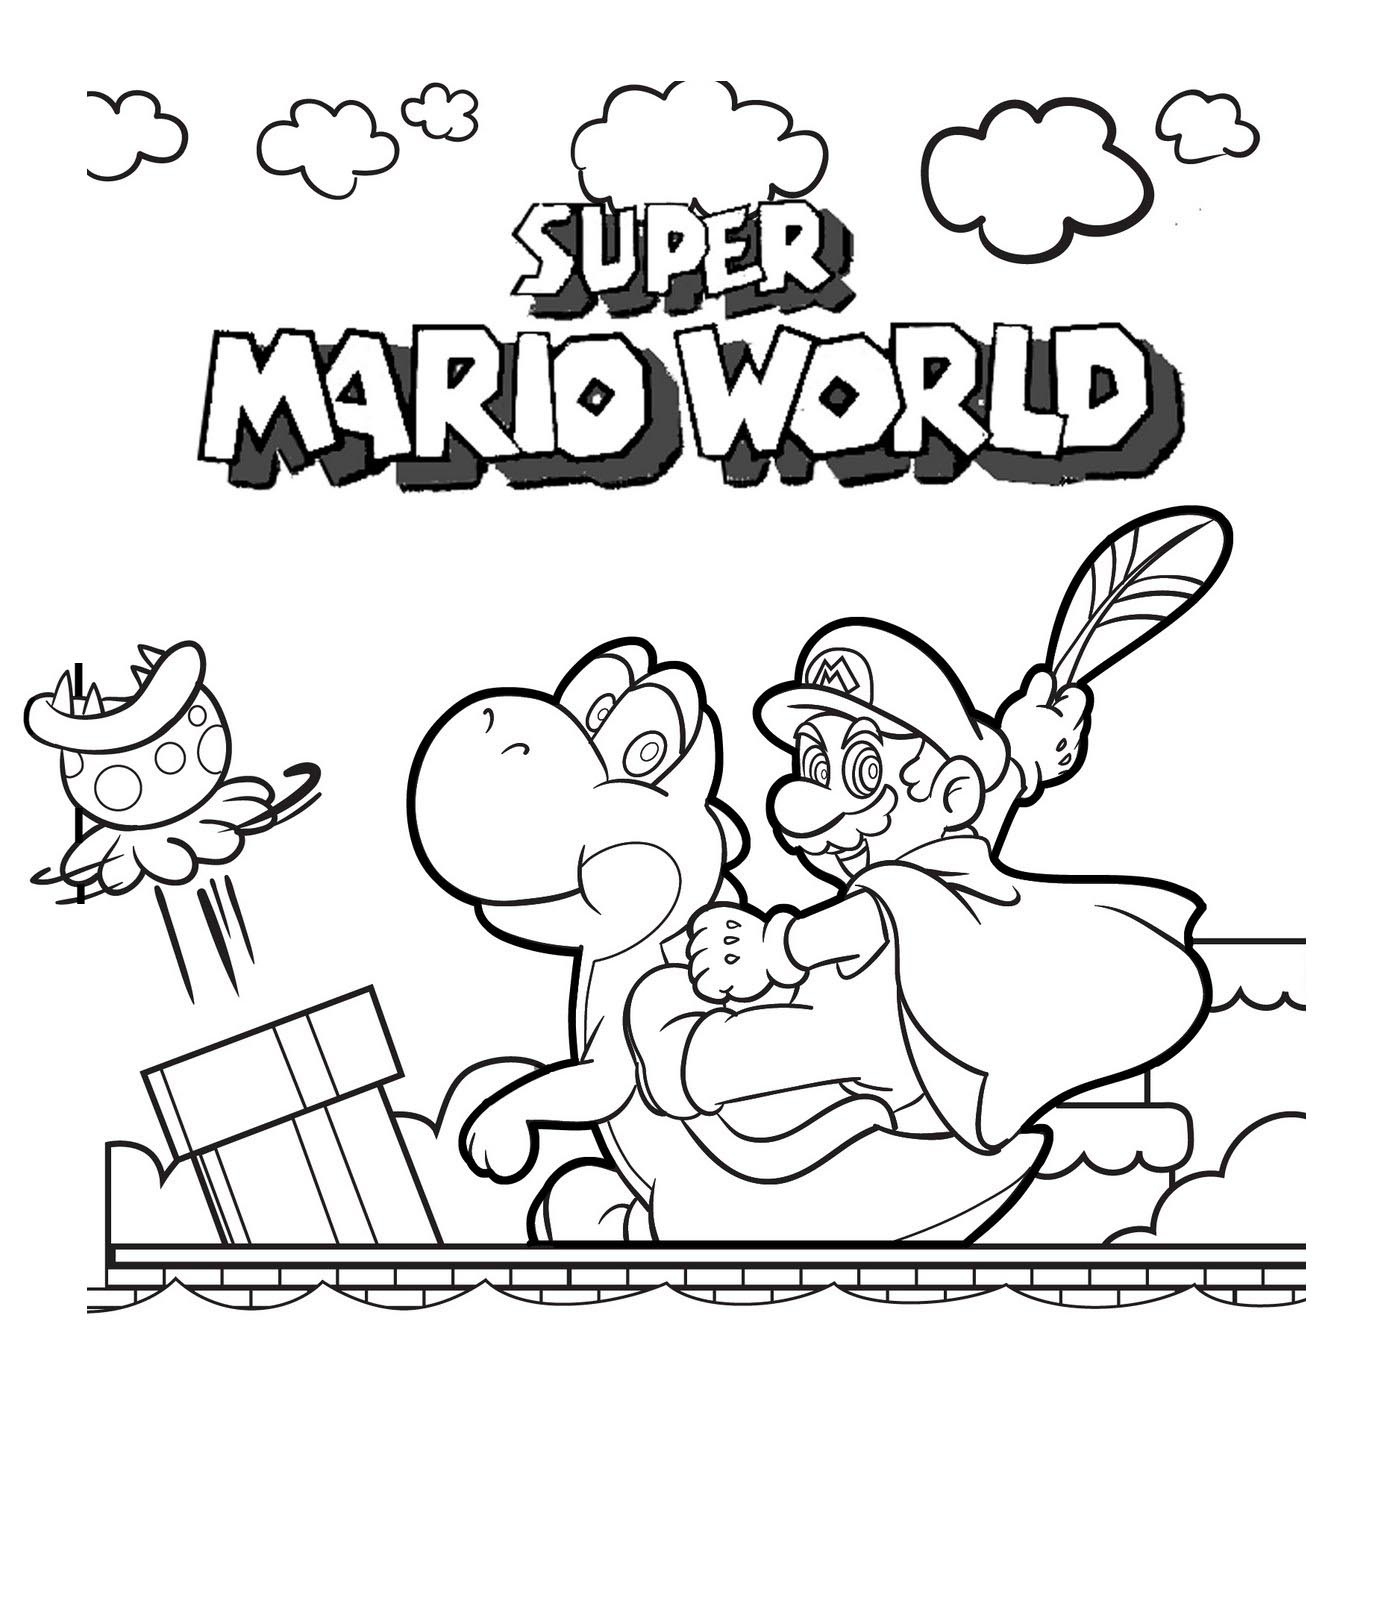 Free Printable Mario Coloring Pages For Kids - Mario Coloring Pages Free Printable